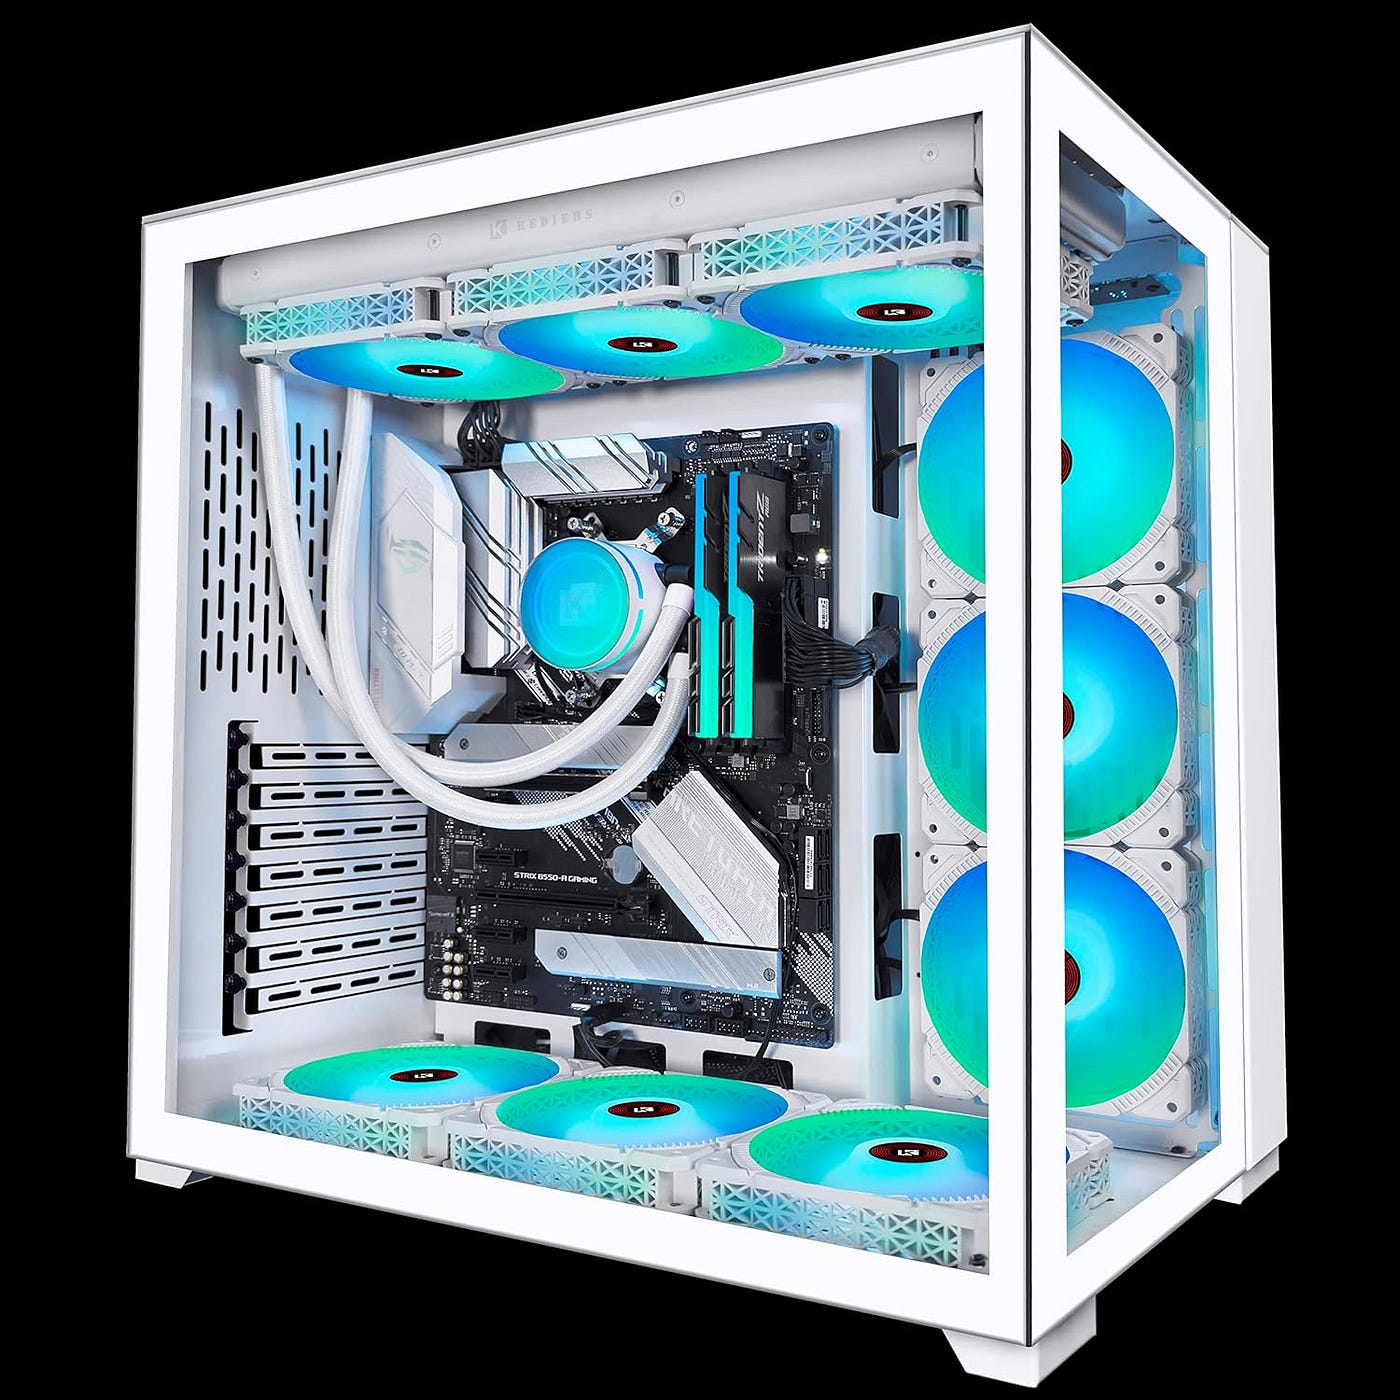 KEDIERS PC Case Pre-Install 9 ARGB Fans, ATX Mid Tower Gaming Case with  Opening Tempered Glass Side Panel Door Desktop Computer Case,C590, by  michael